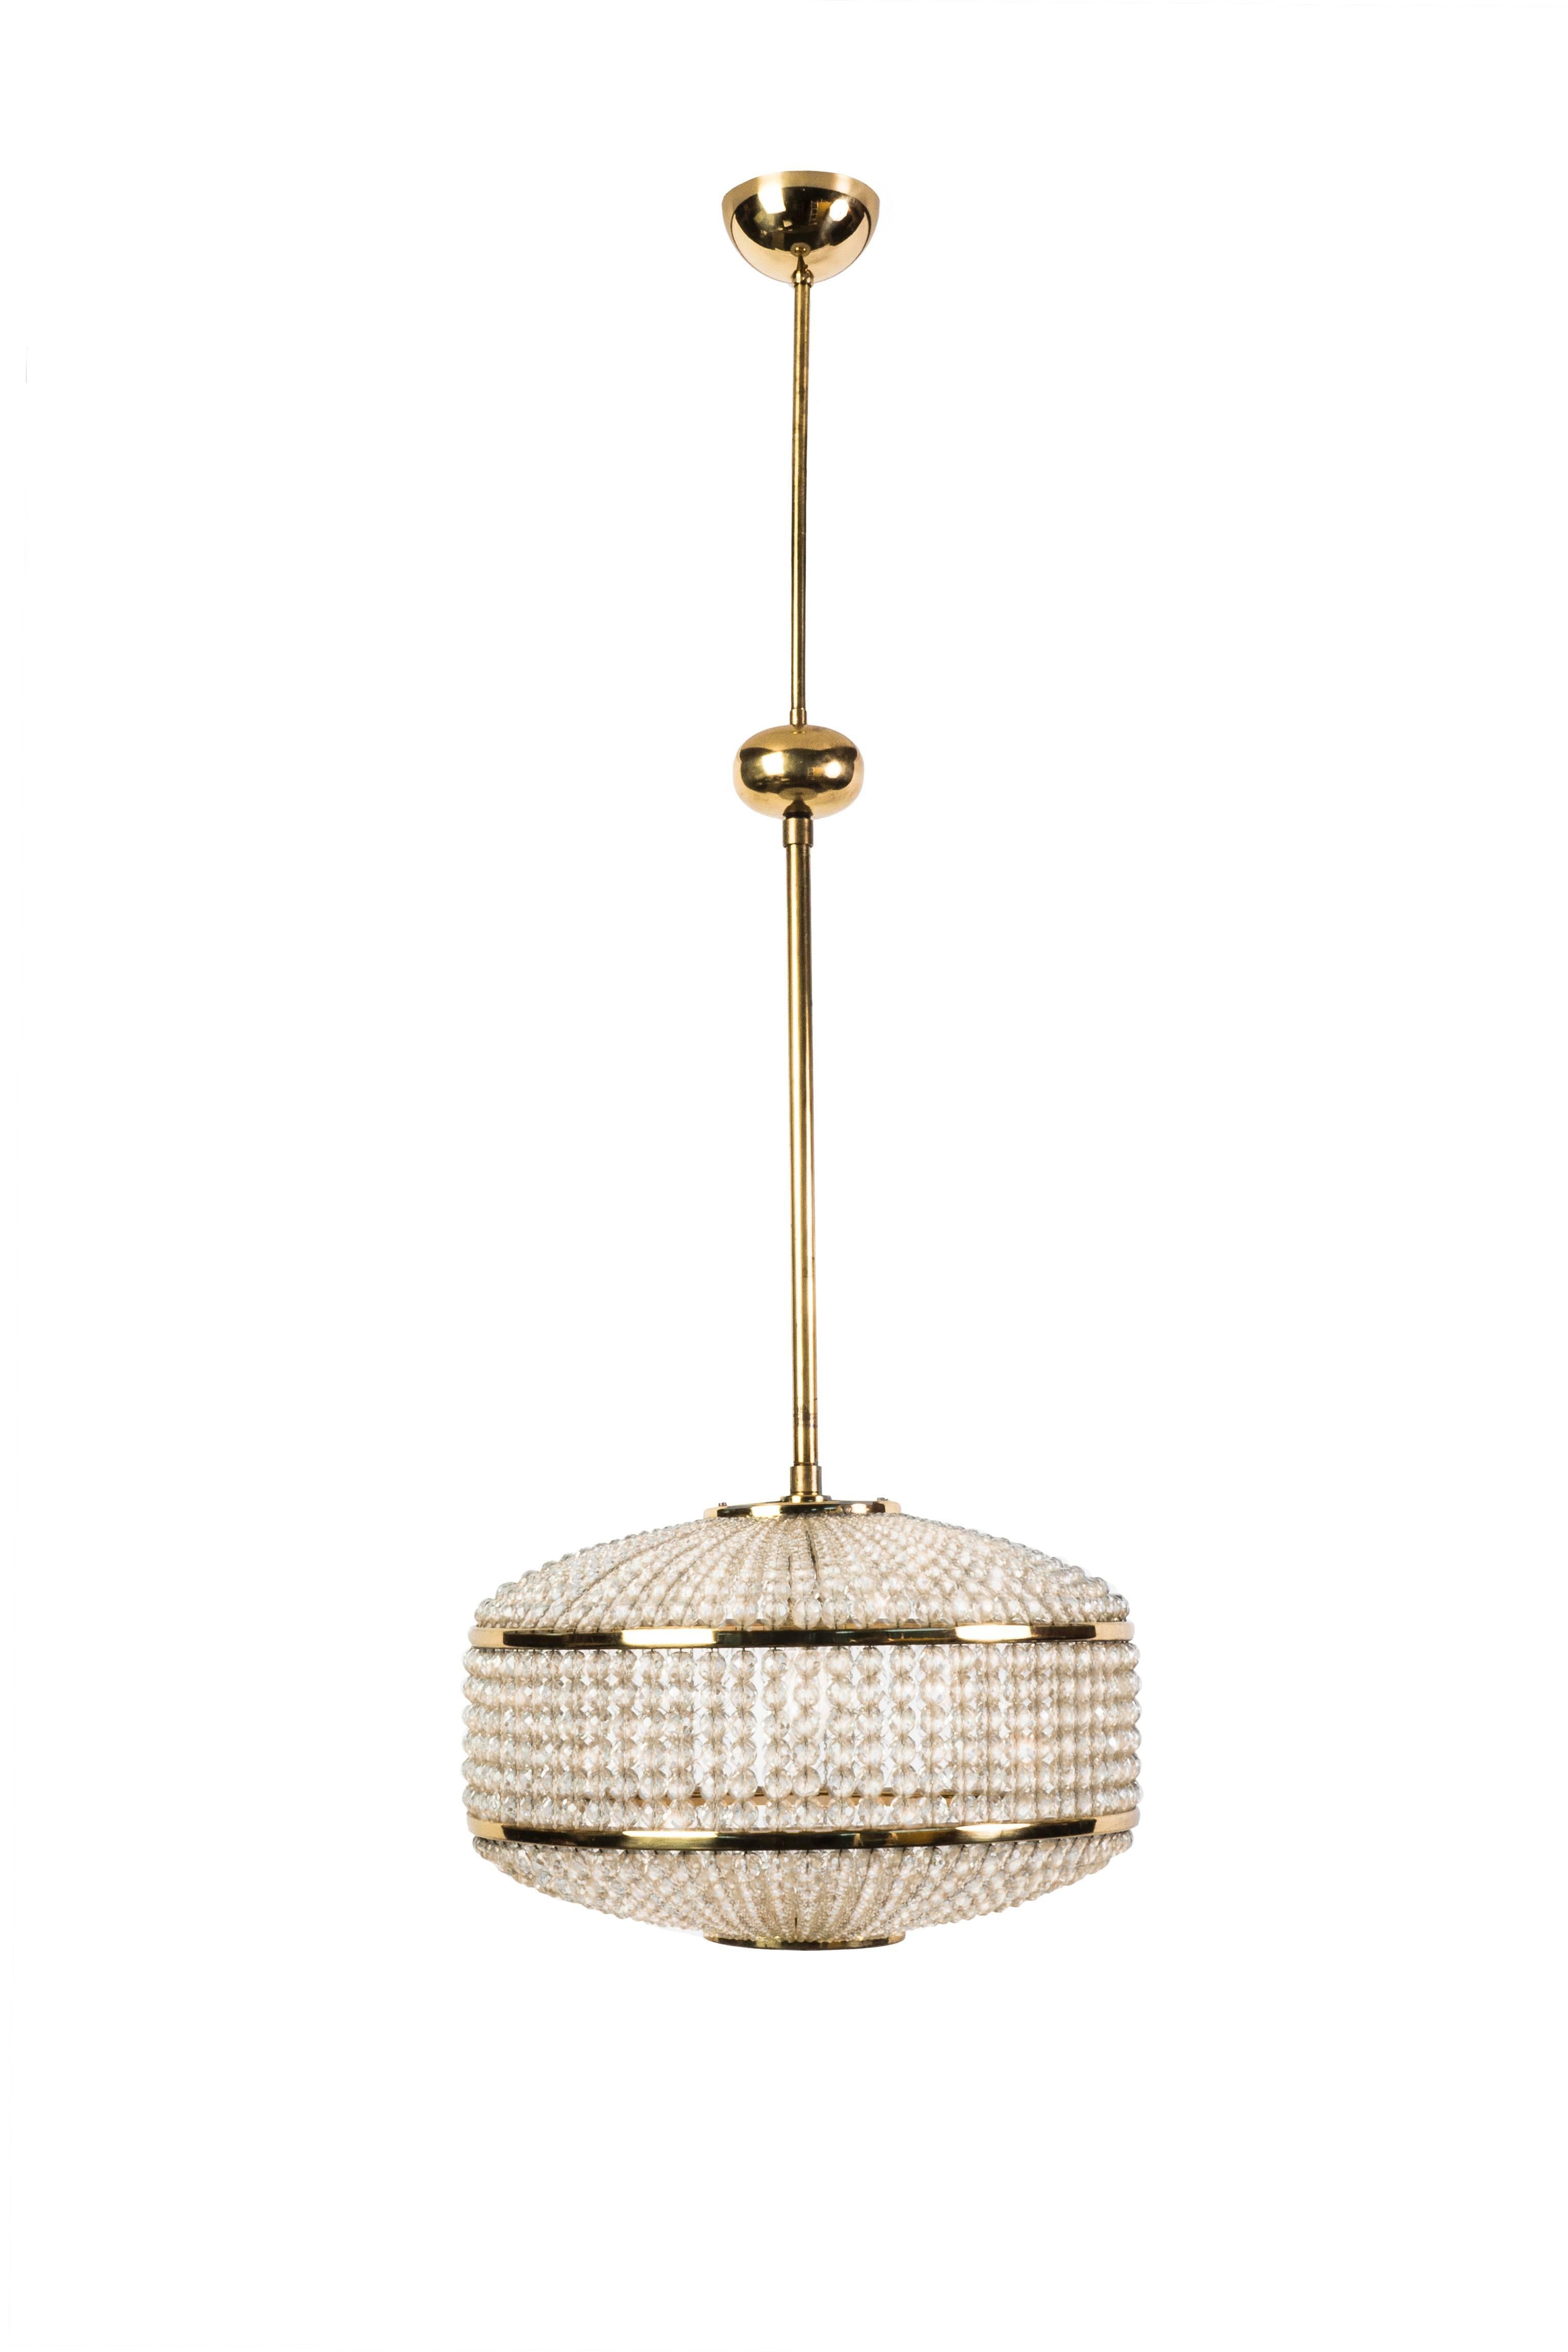 Exceptional Crystal Chandelier Pendant by Lobmeyr In Good Condition For Sale In Kingston, NY